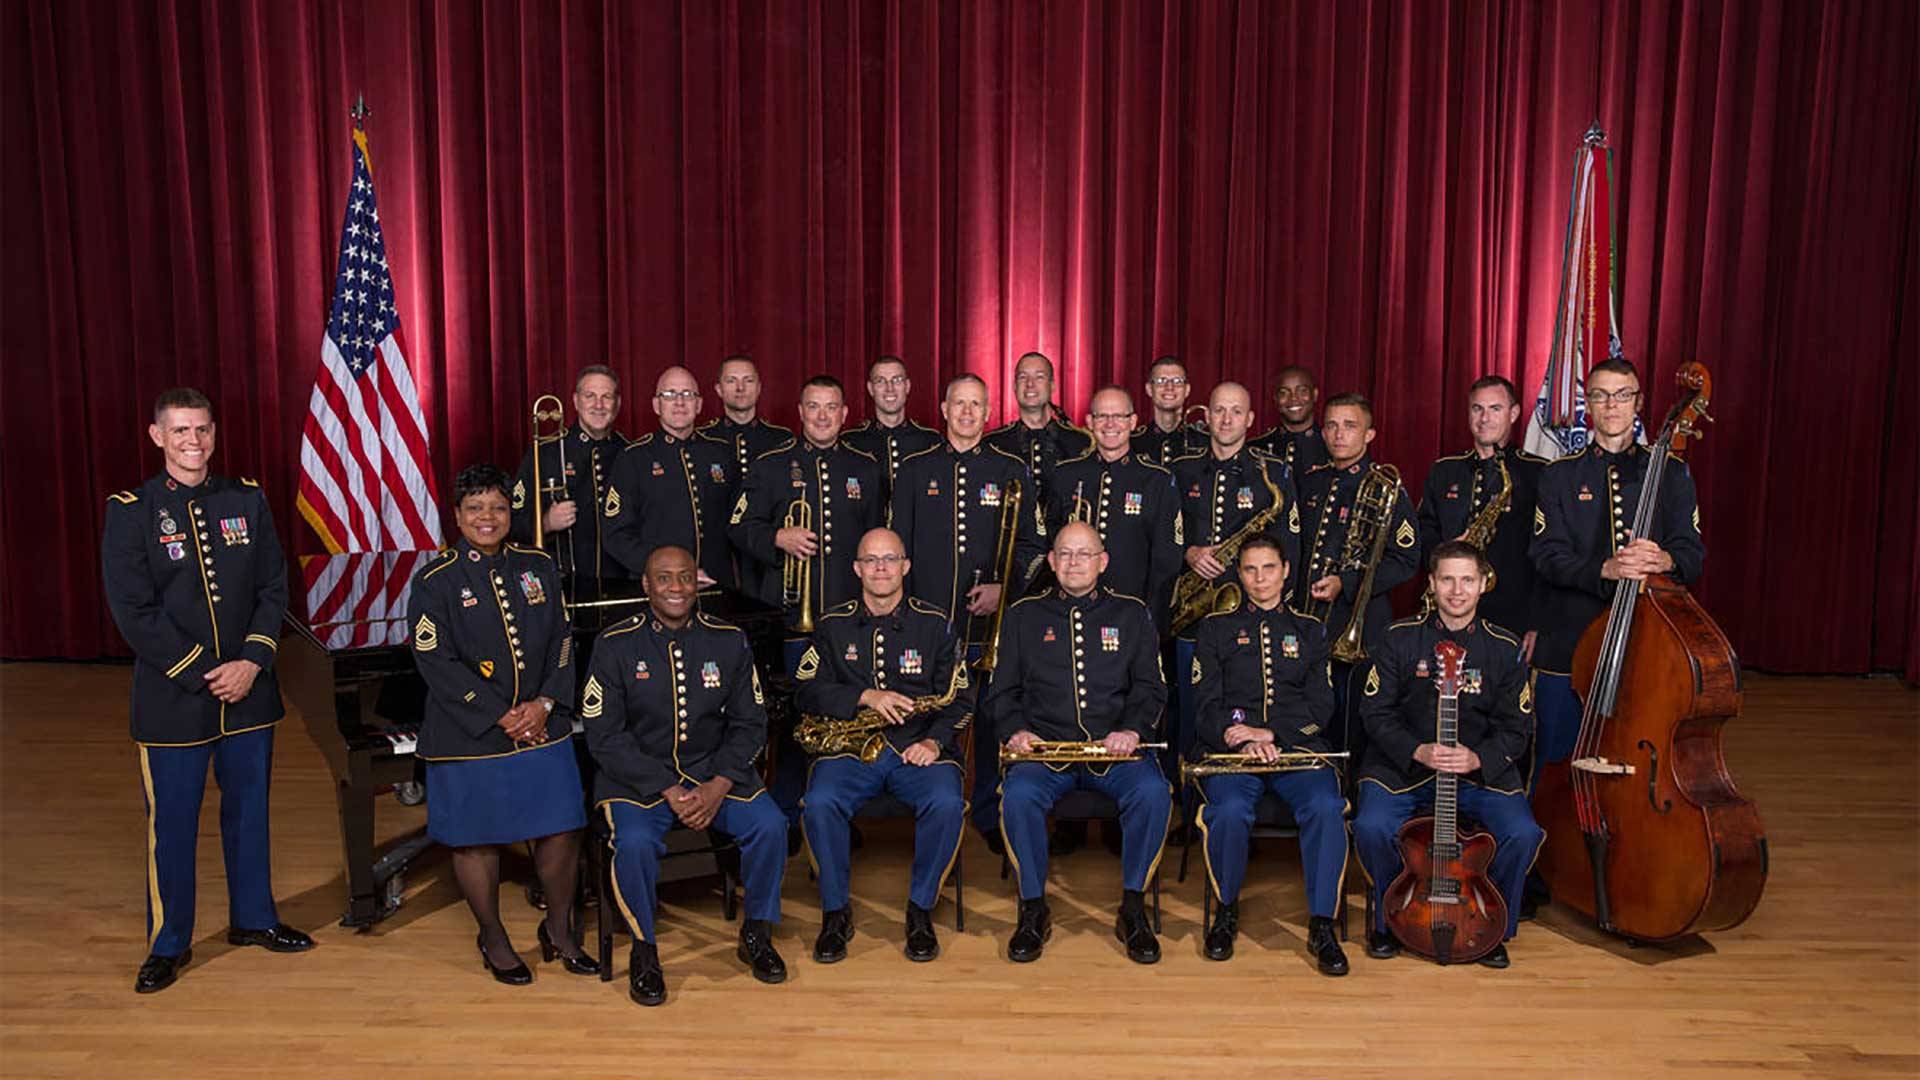 U.S. Army Field Band Jazz Ambassadors to perform free concerts at Bayou Theater